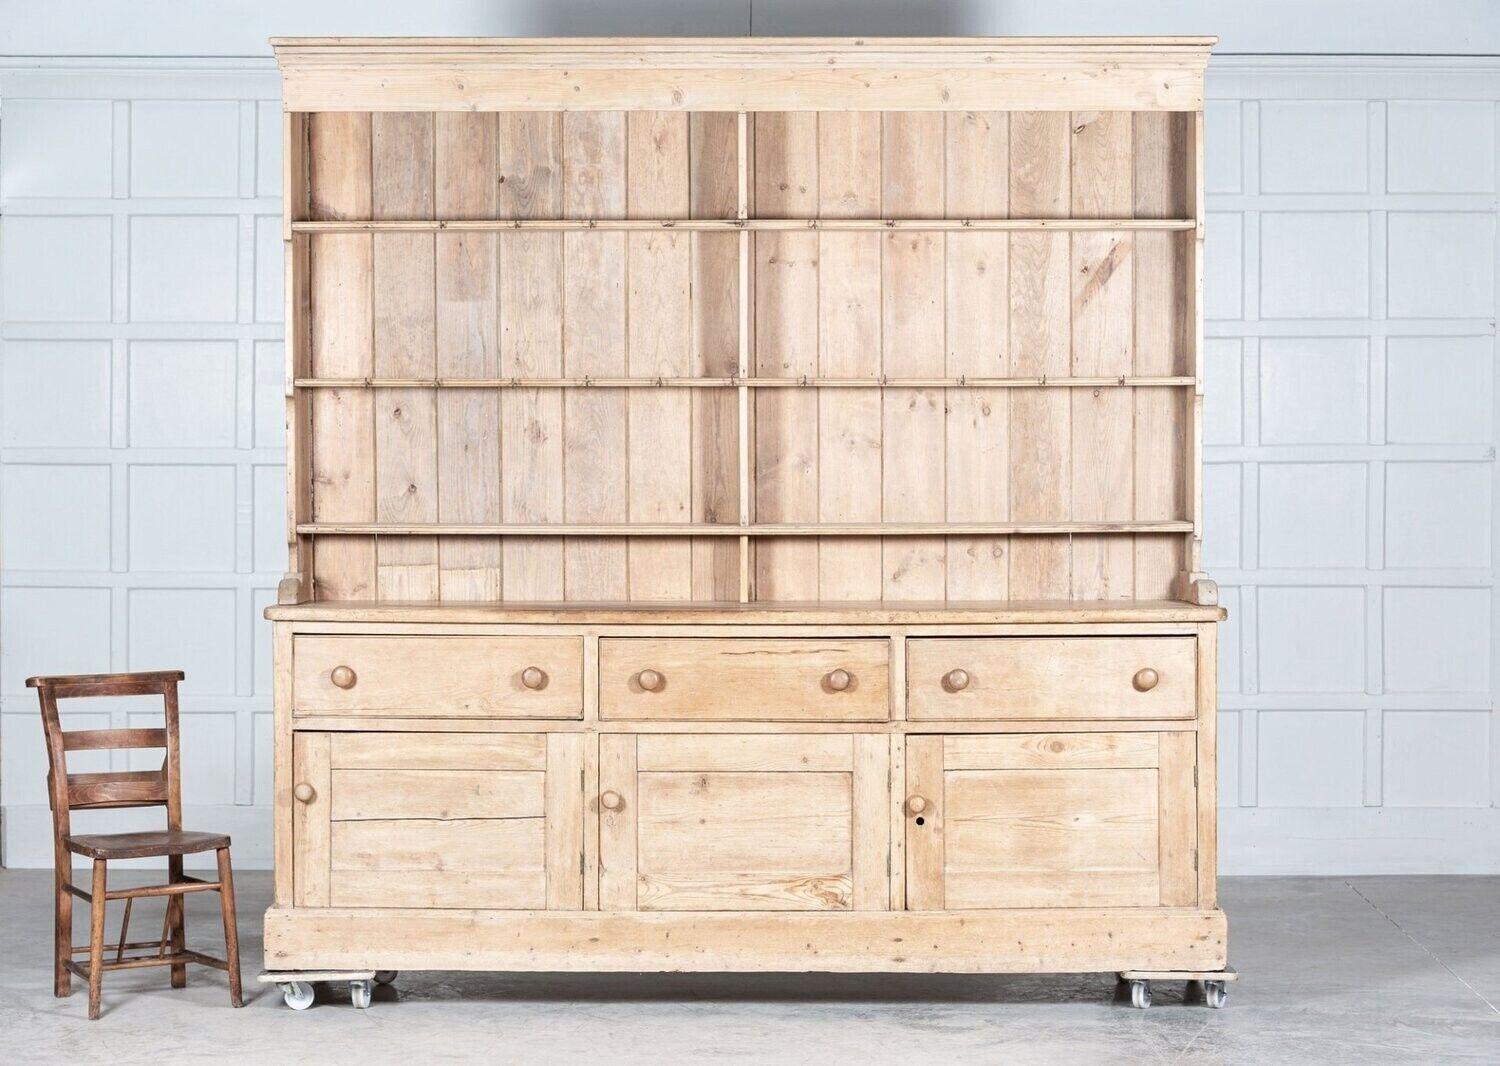 Monumental 19th C English Pine Farmhouse Dresser In Good Condition For Sale In Staffordshire, GB